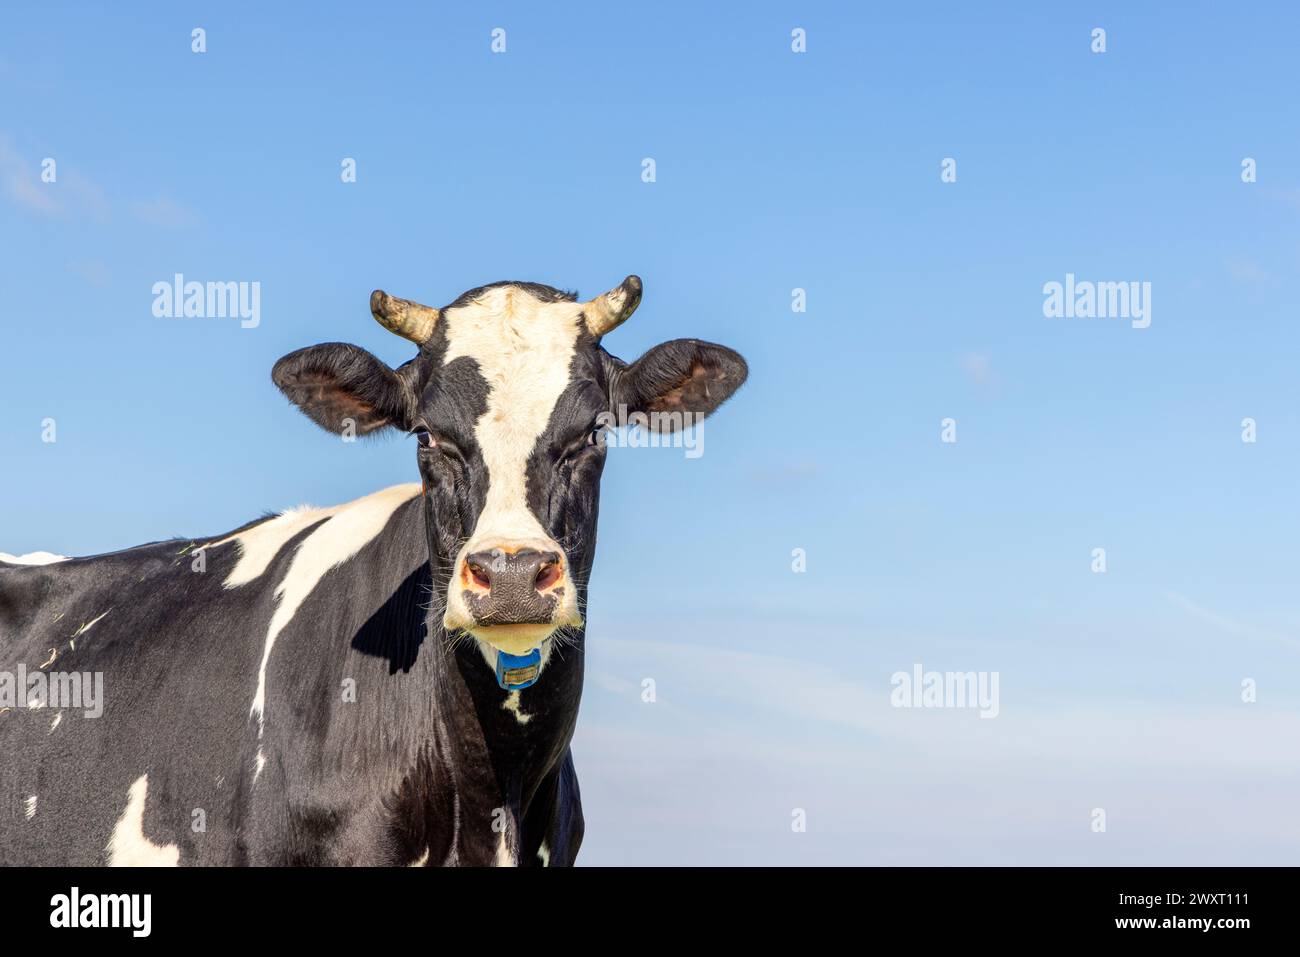 Horned cow looking at the edge, a head of a pretty looking friendly black and white one, and blue background with copy space Stock Photo